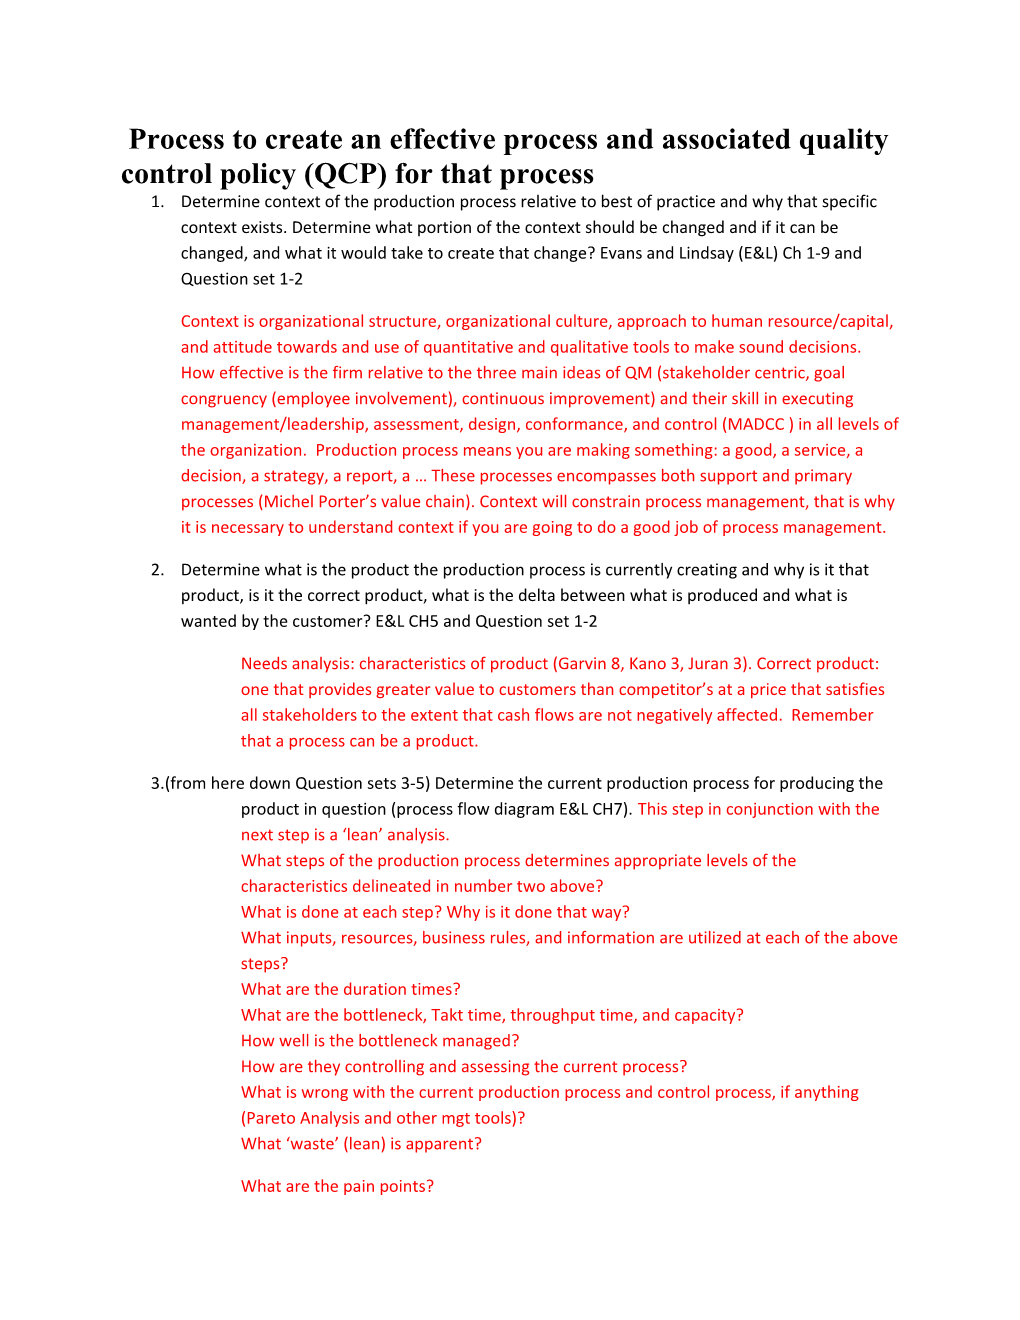 Process to Create an Effective Process and Associated Quality Control Policy (QCP) For